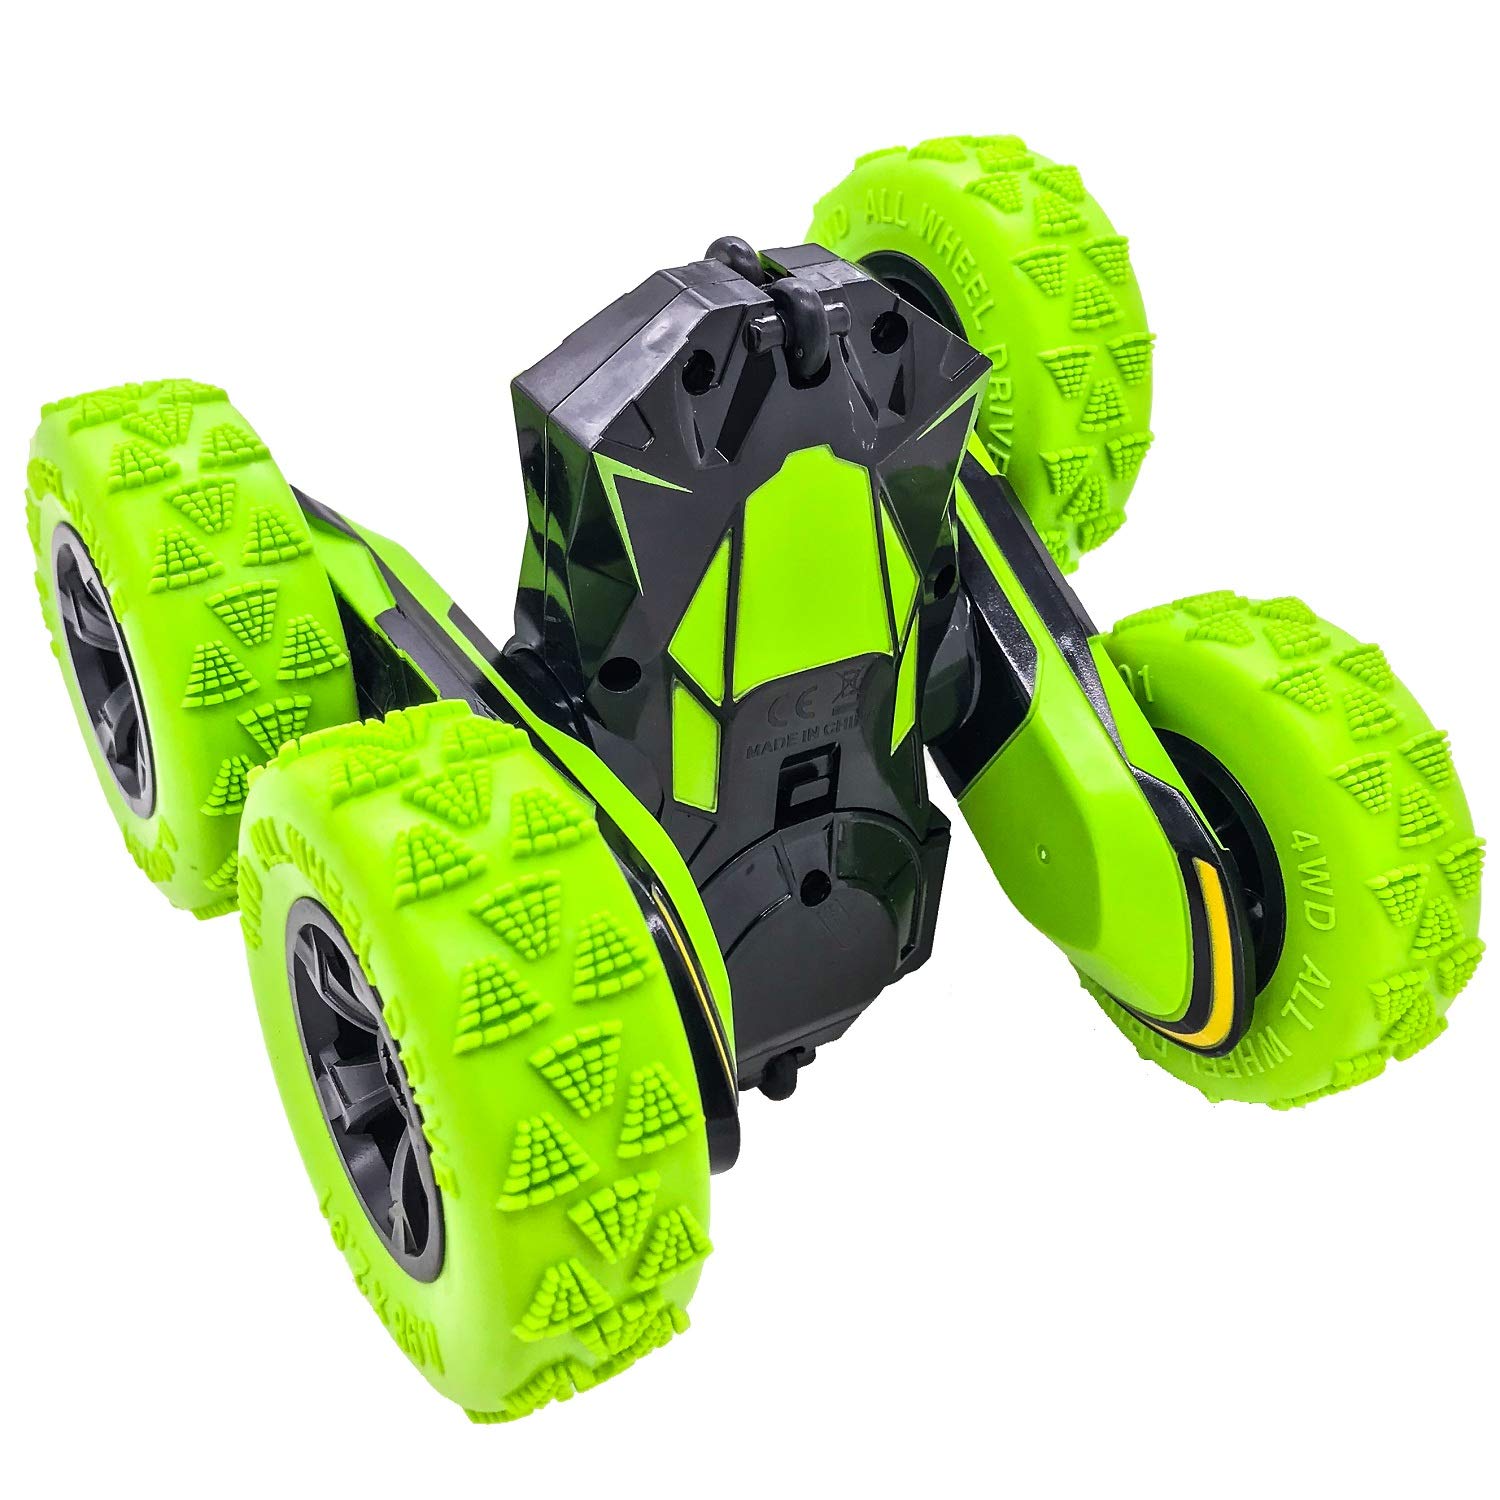 Threeking RC Cars Stunt car Remote Control Car Double Sided 360° Flips Rotating 4WD Outdoor Indoor car Toy Present Gift for Boys/Girls Ages 6+